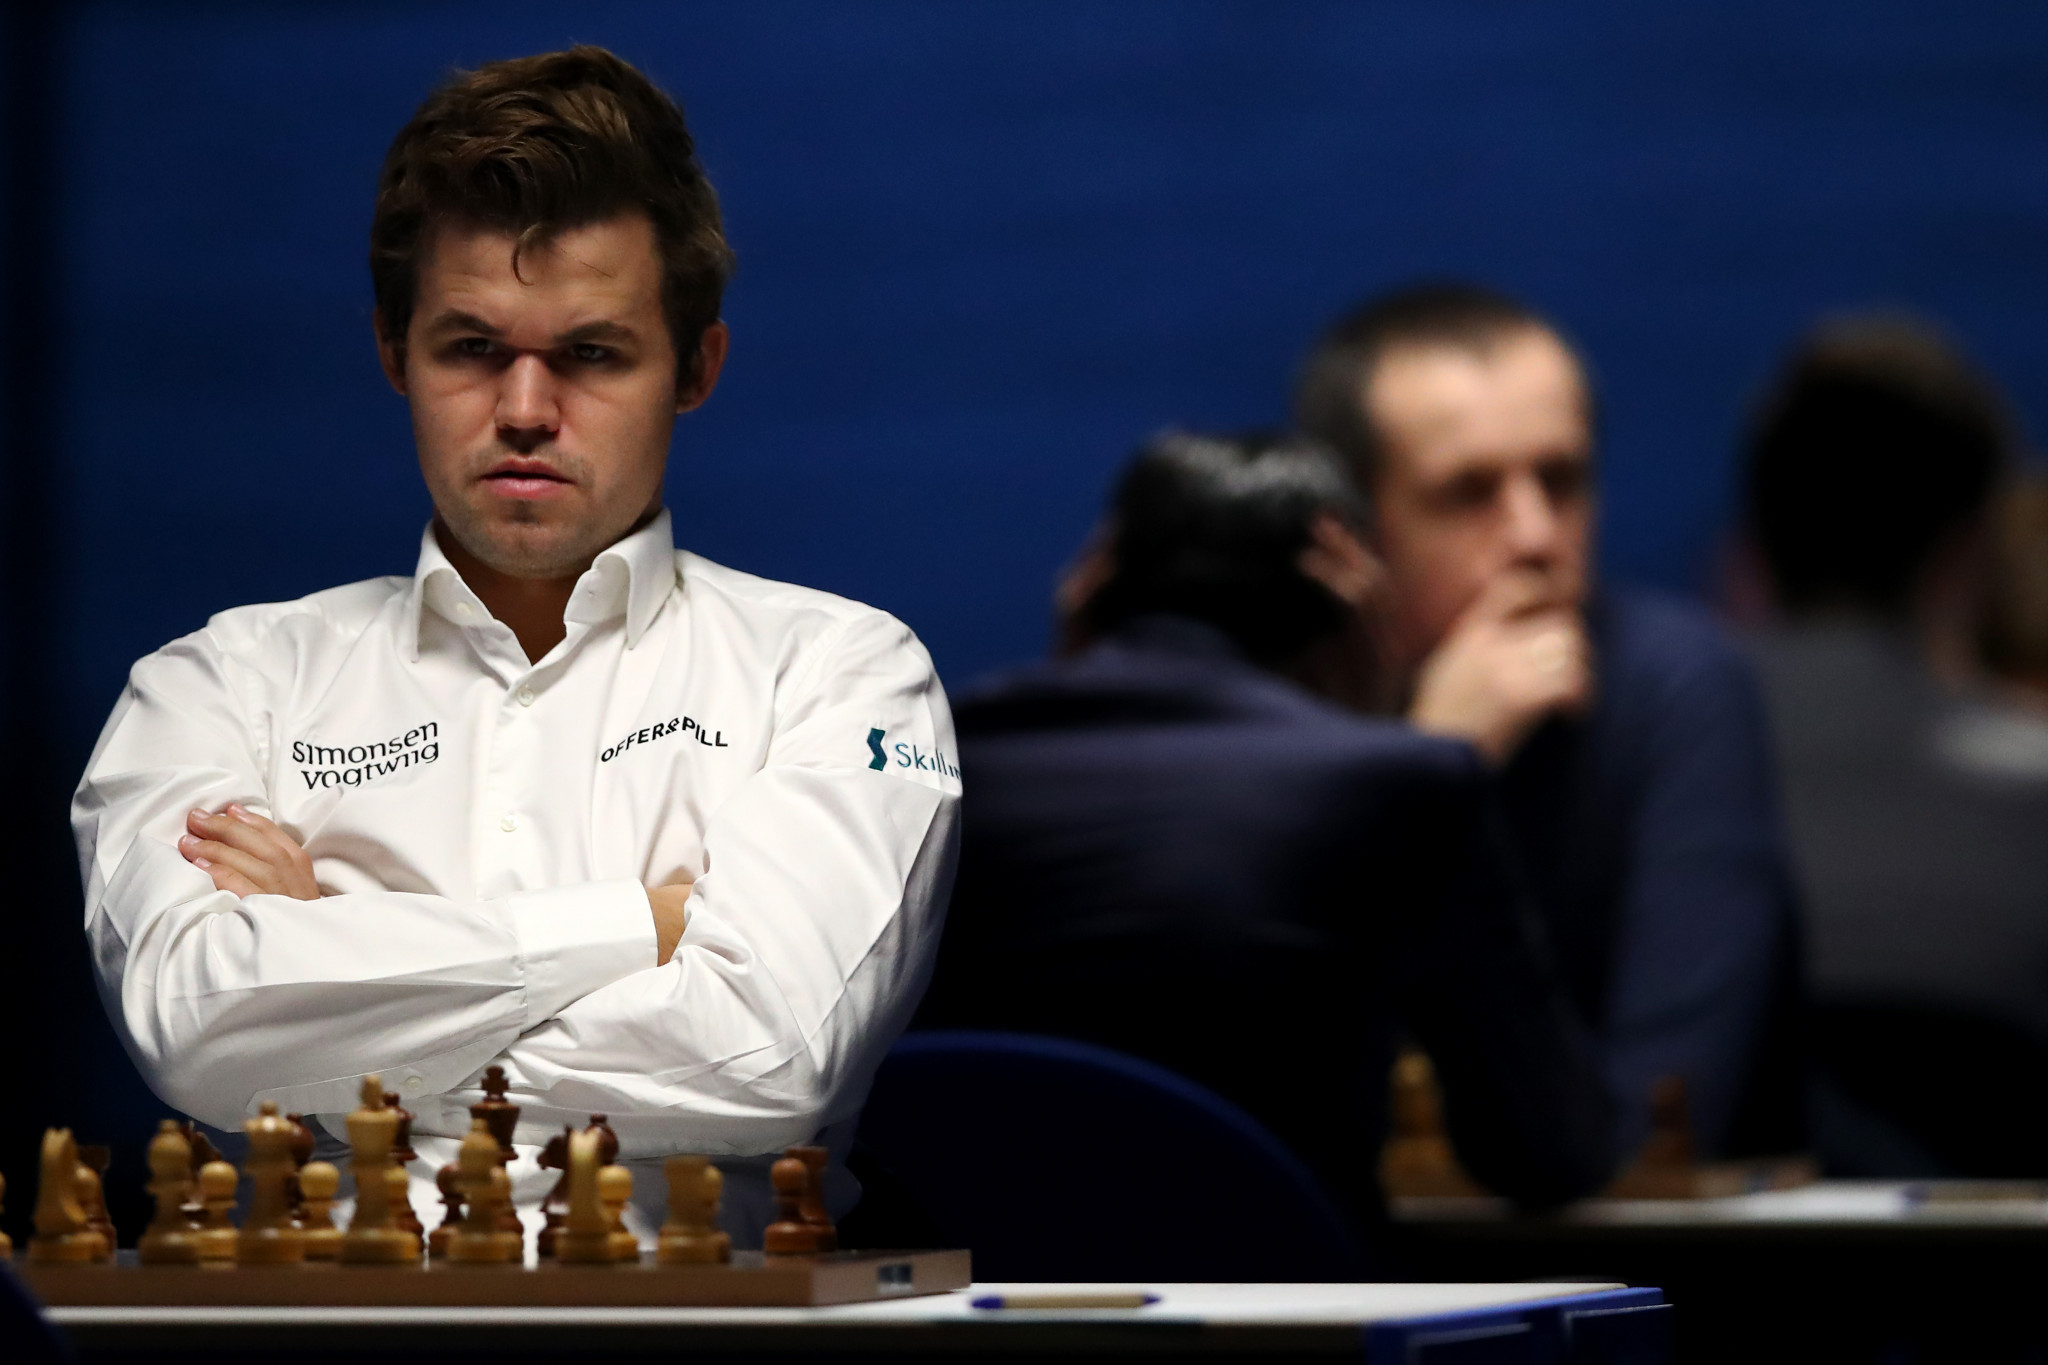 Chess world number one Carlsen accuses Niemann of cheating more than admitted